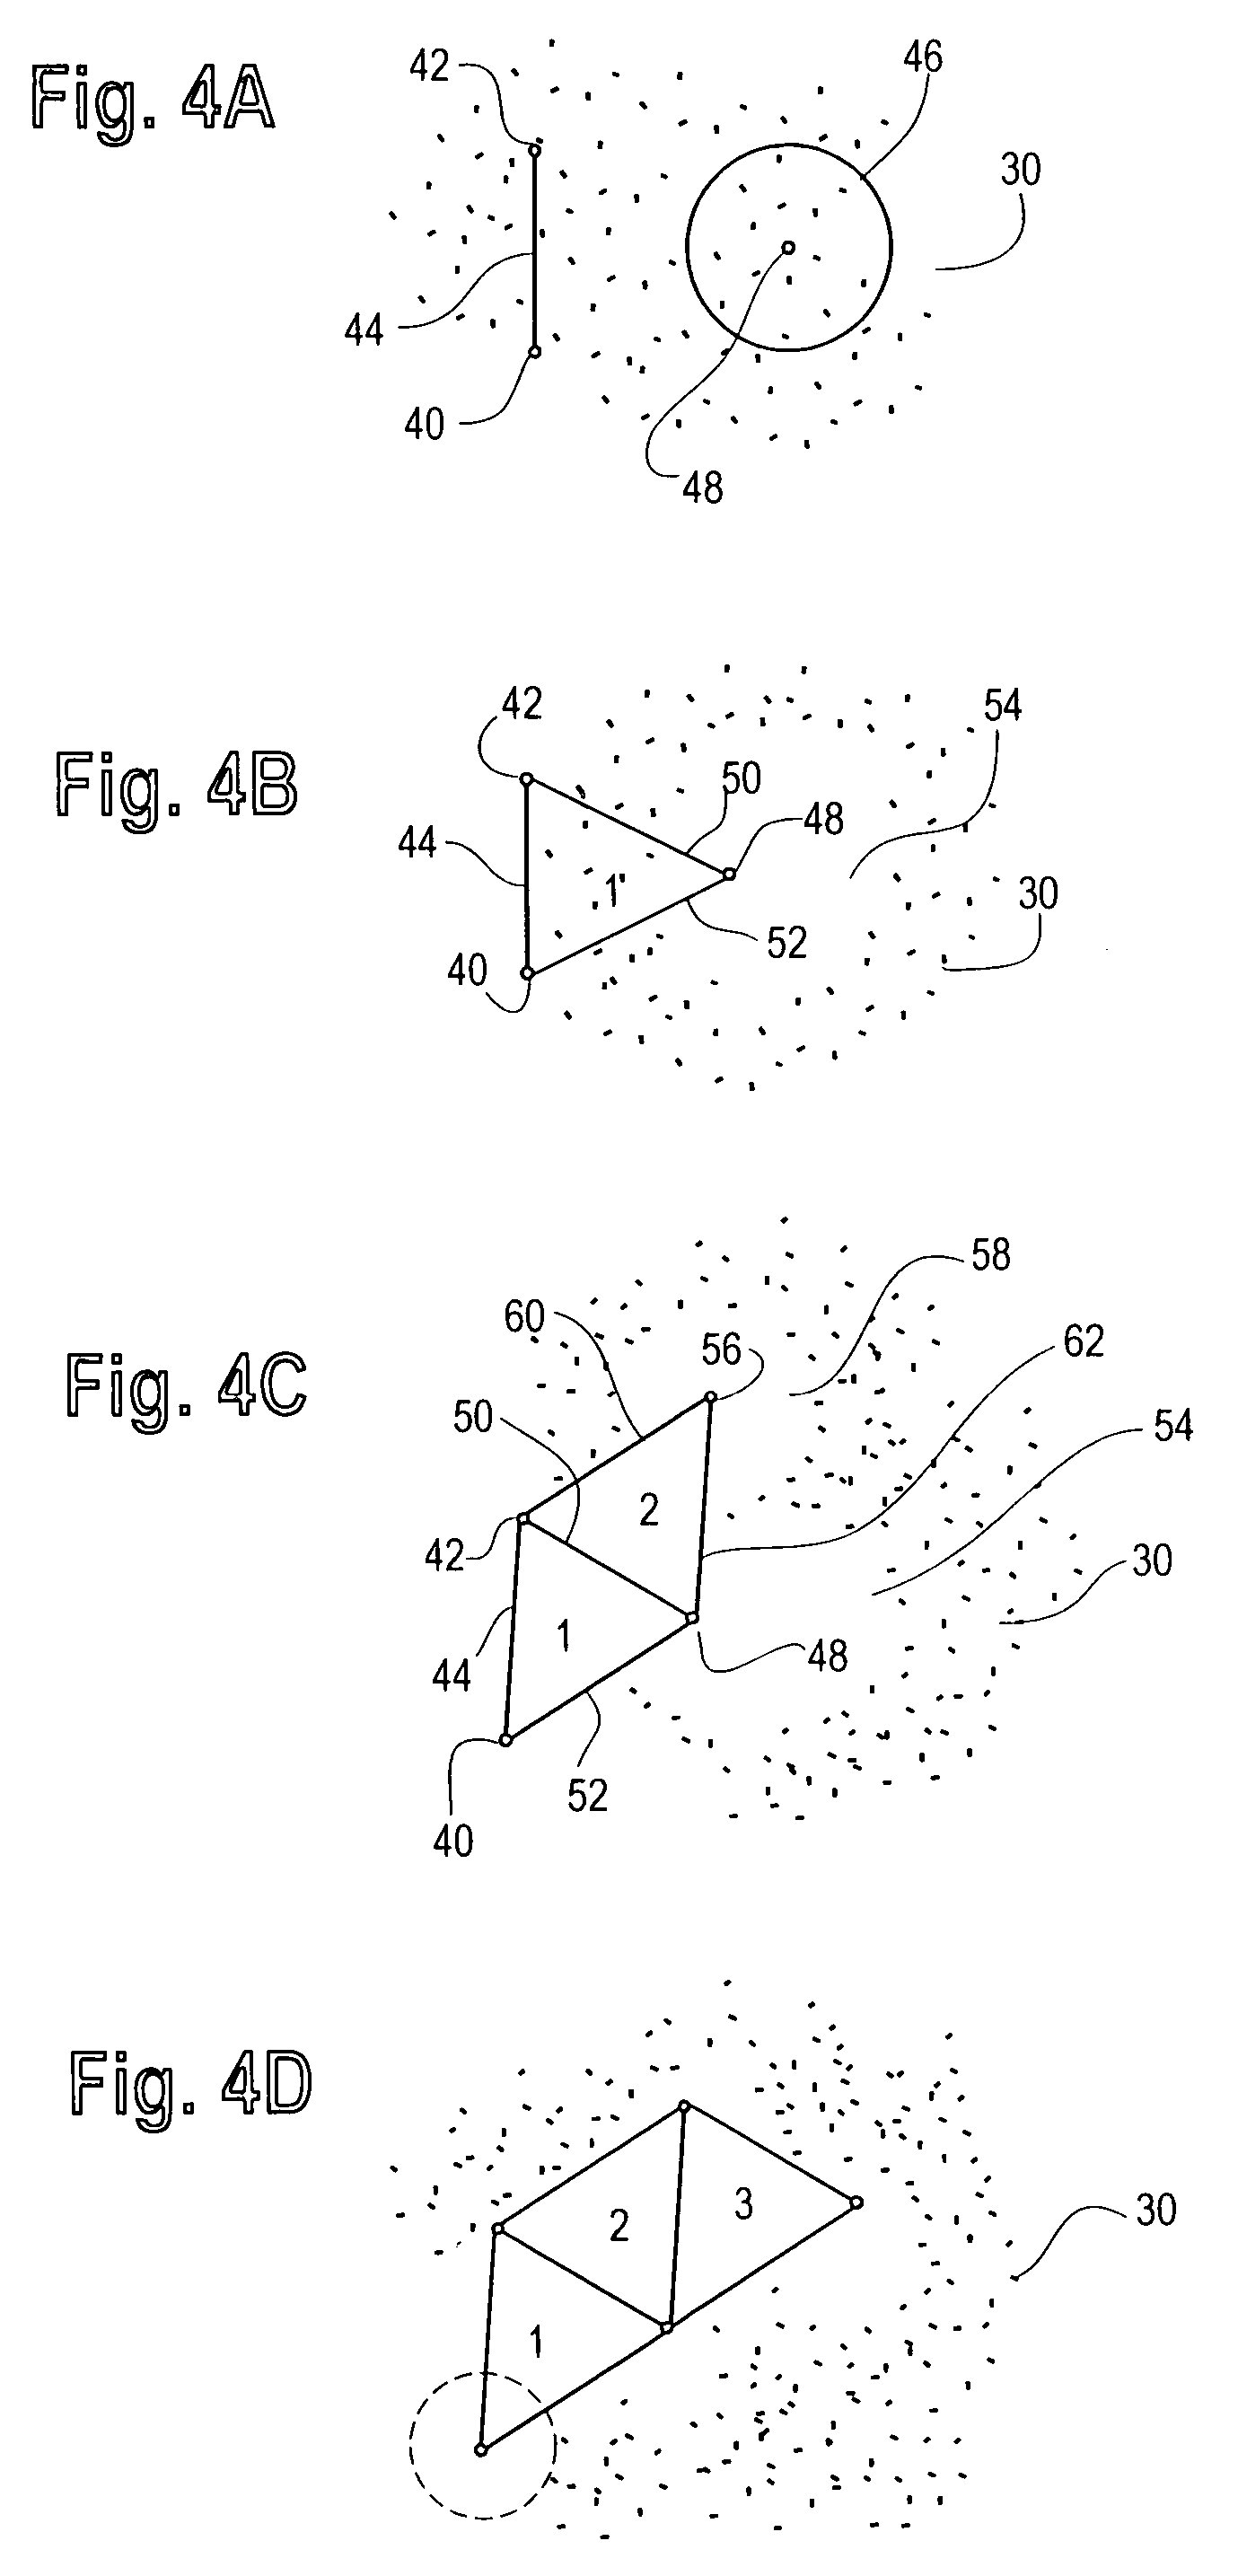 Method for creating single 3D surface model from a point cloud